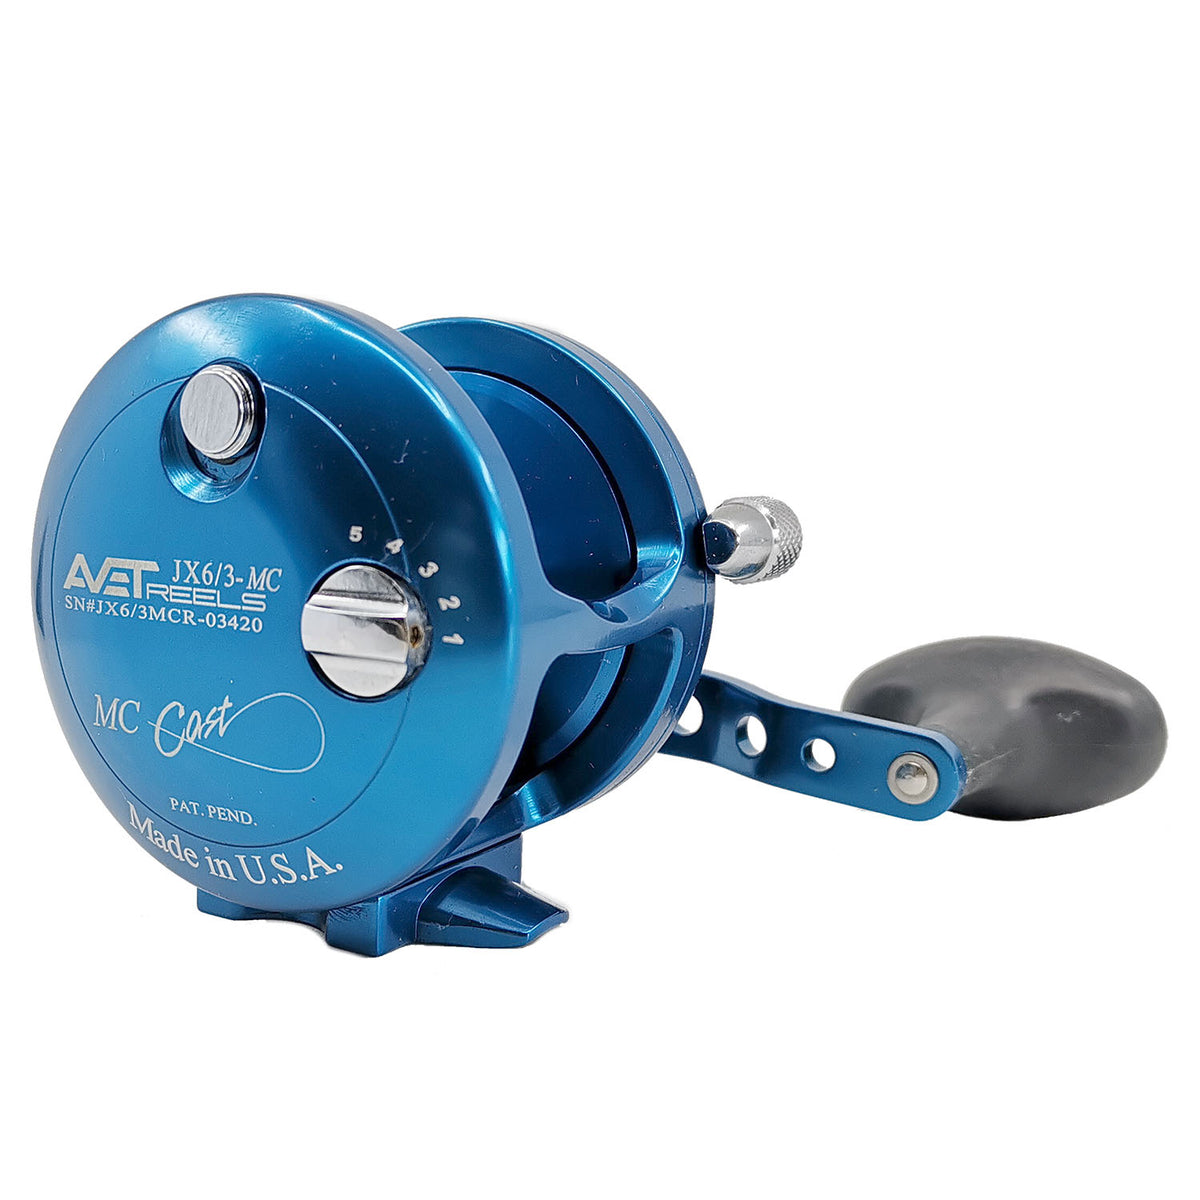 Avet JX G2 6/3 MC Two Speed Reels Right Hand / Silver